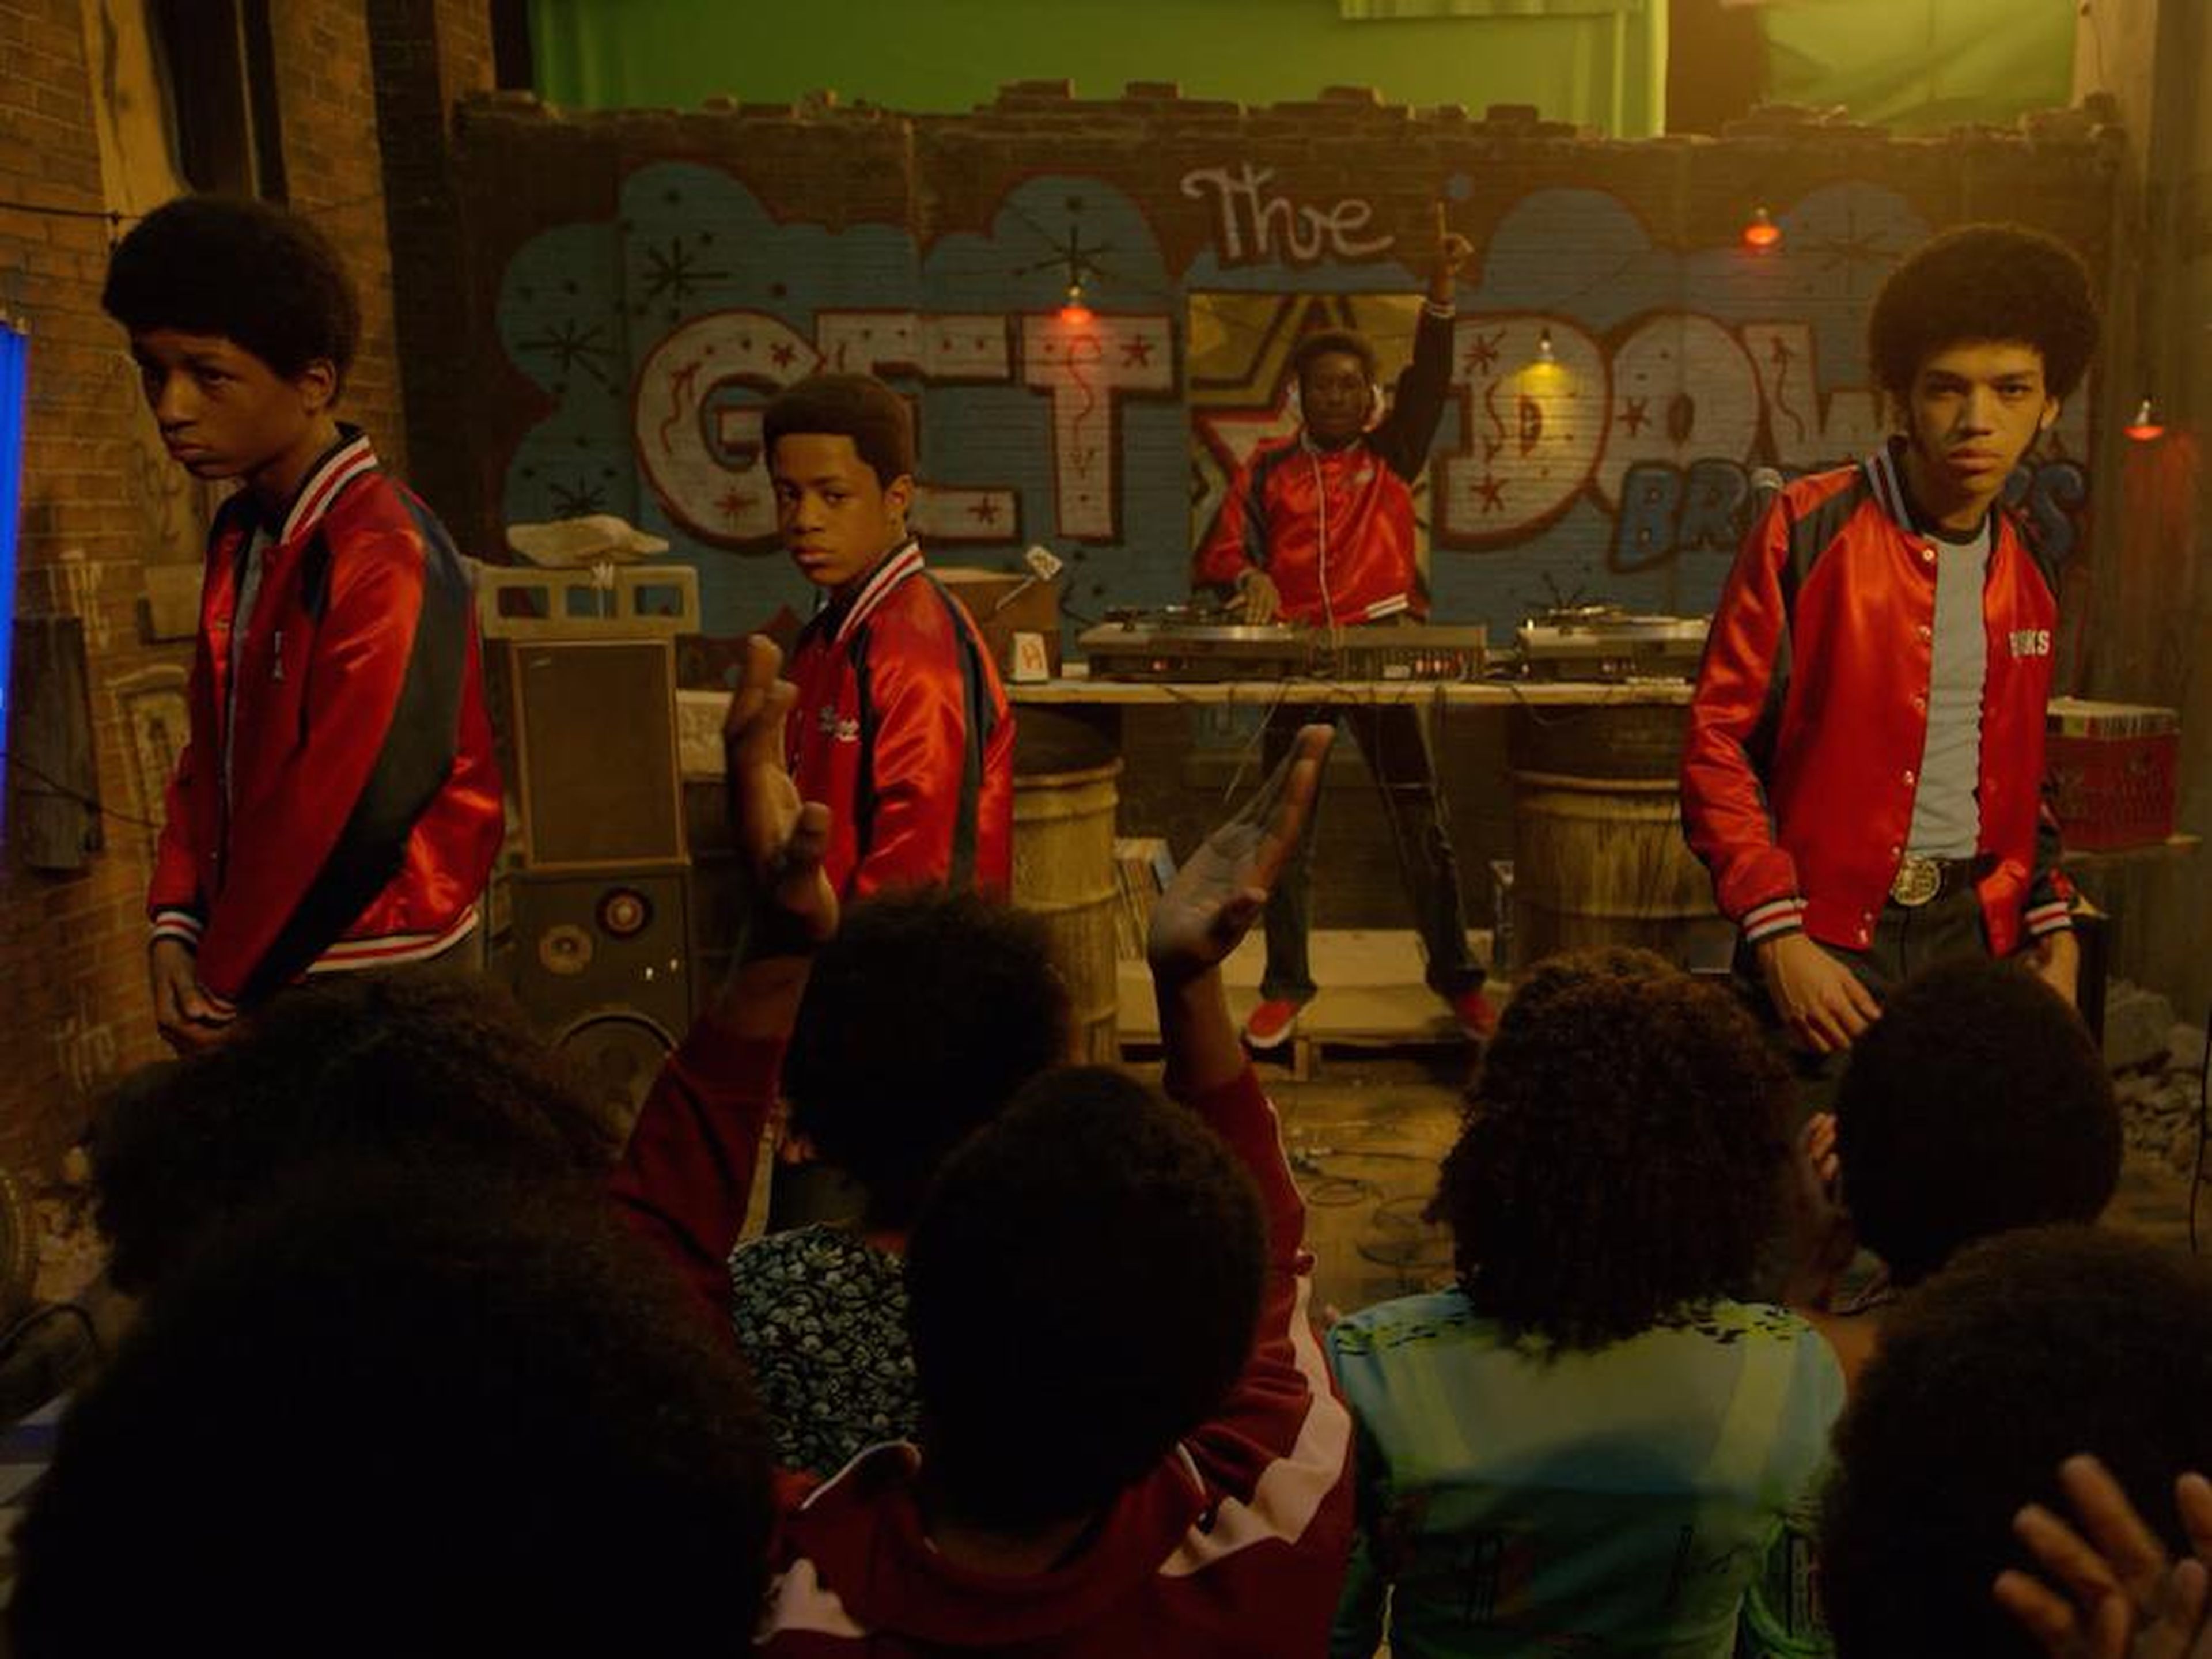 52. "The Get Down" — 81%